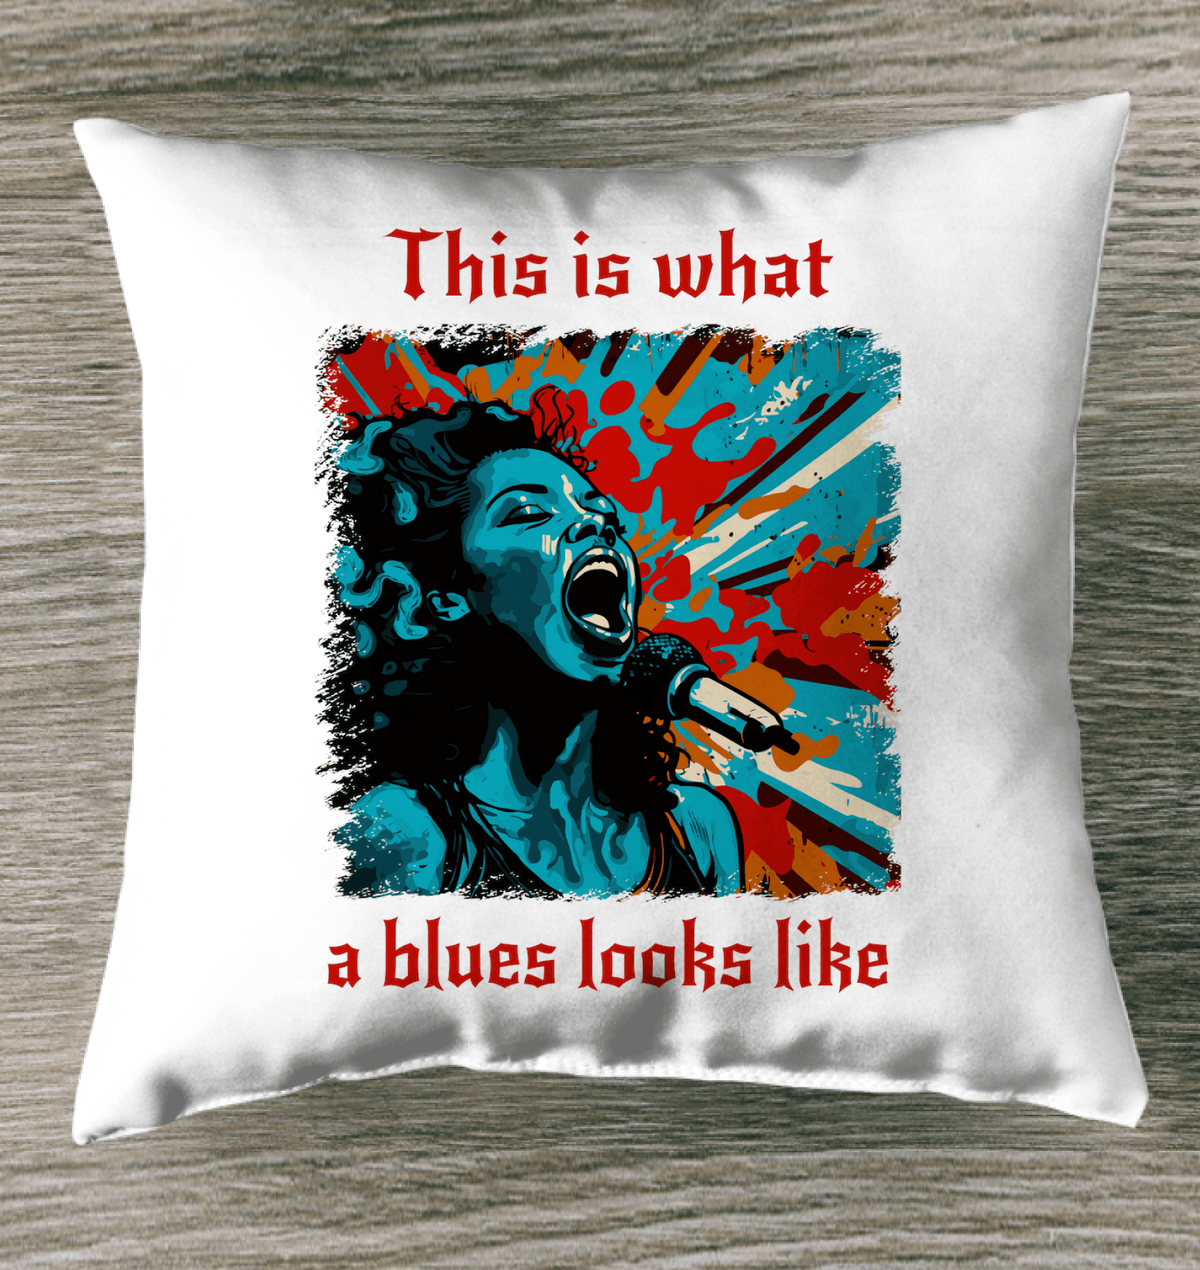 What A Blues Looks Like Outdoor Pillow - Beyond T-shirts